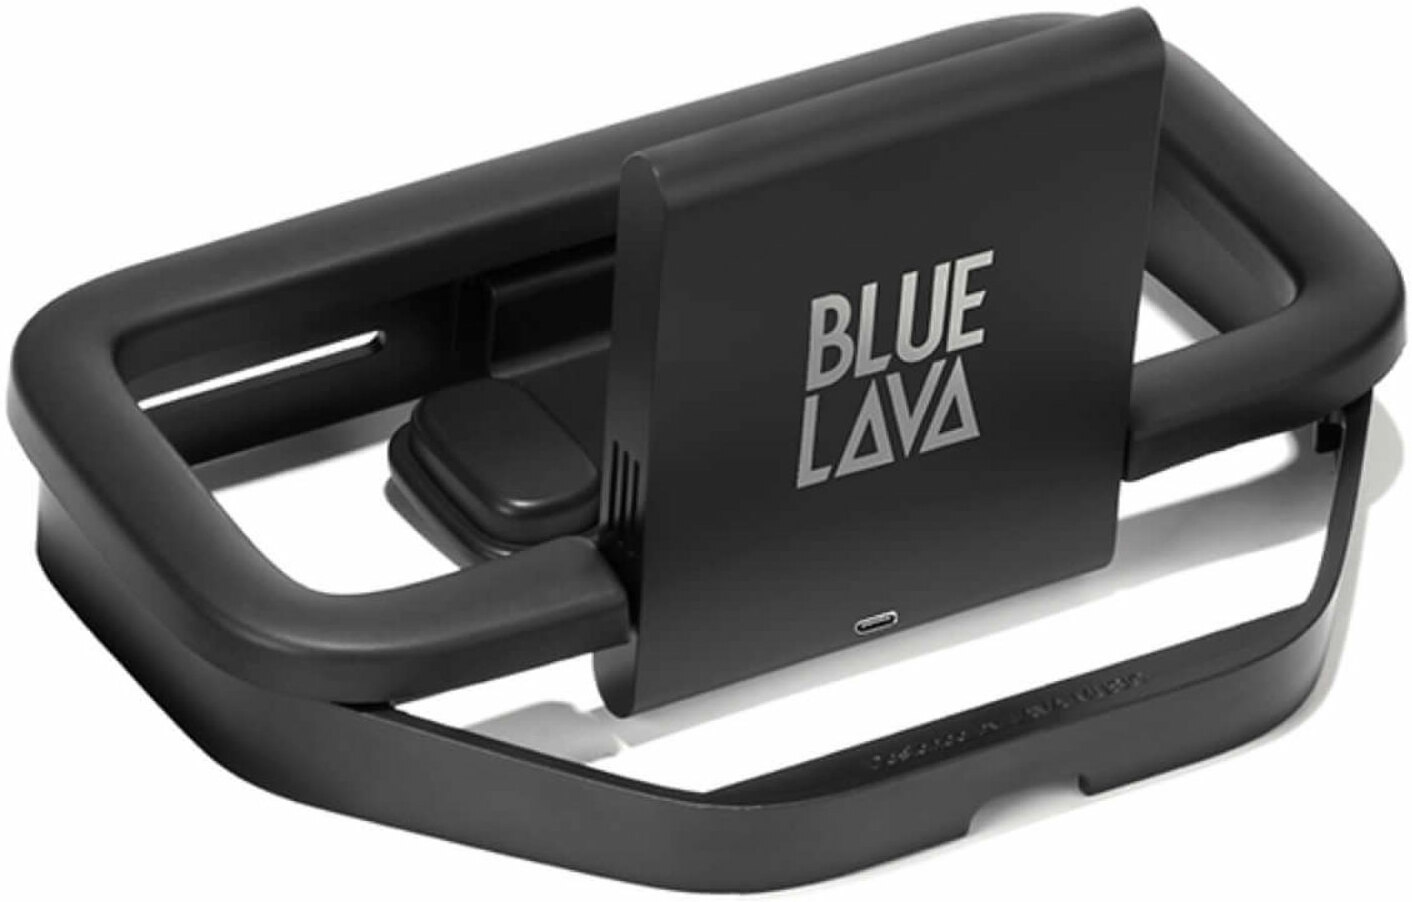 Lava Music Airflow Wireless Charger Blue Lava Guitar Stand - Batterie - Main picture